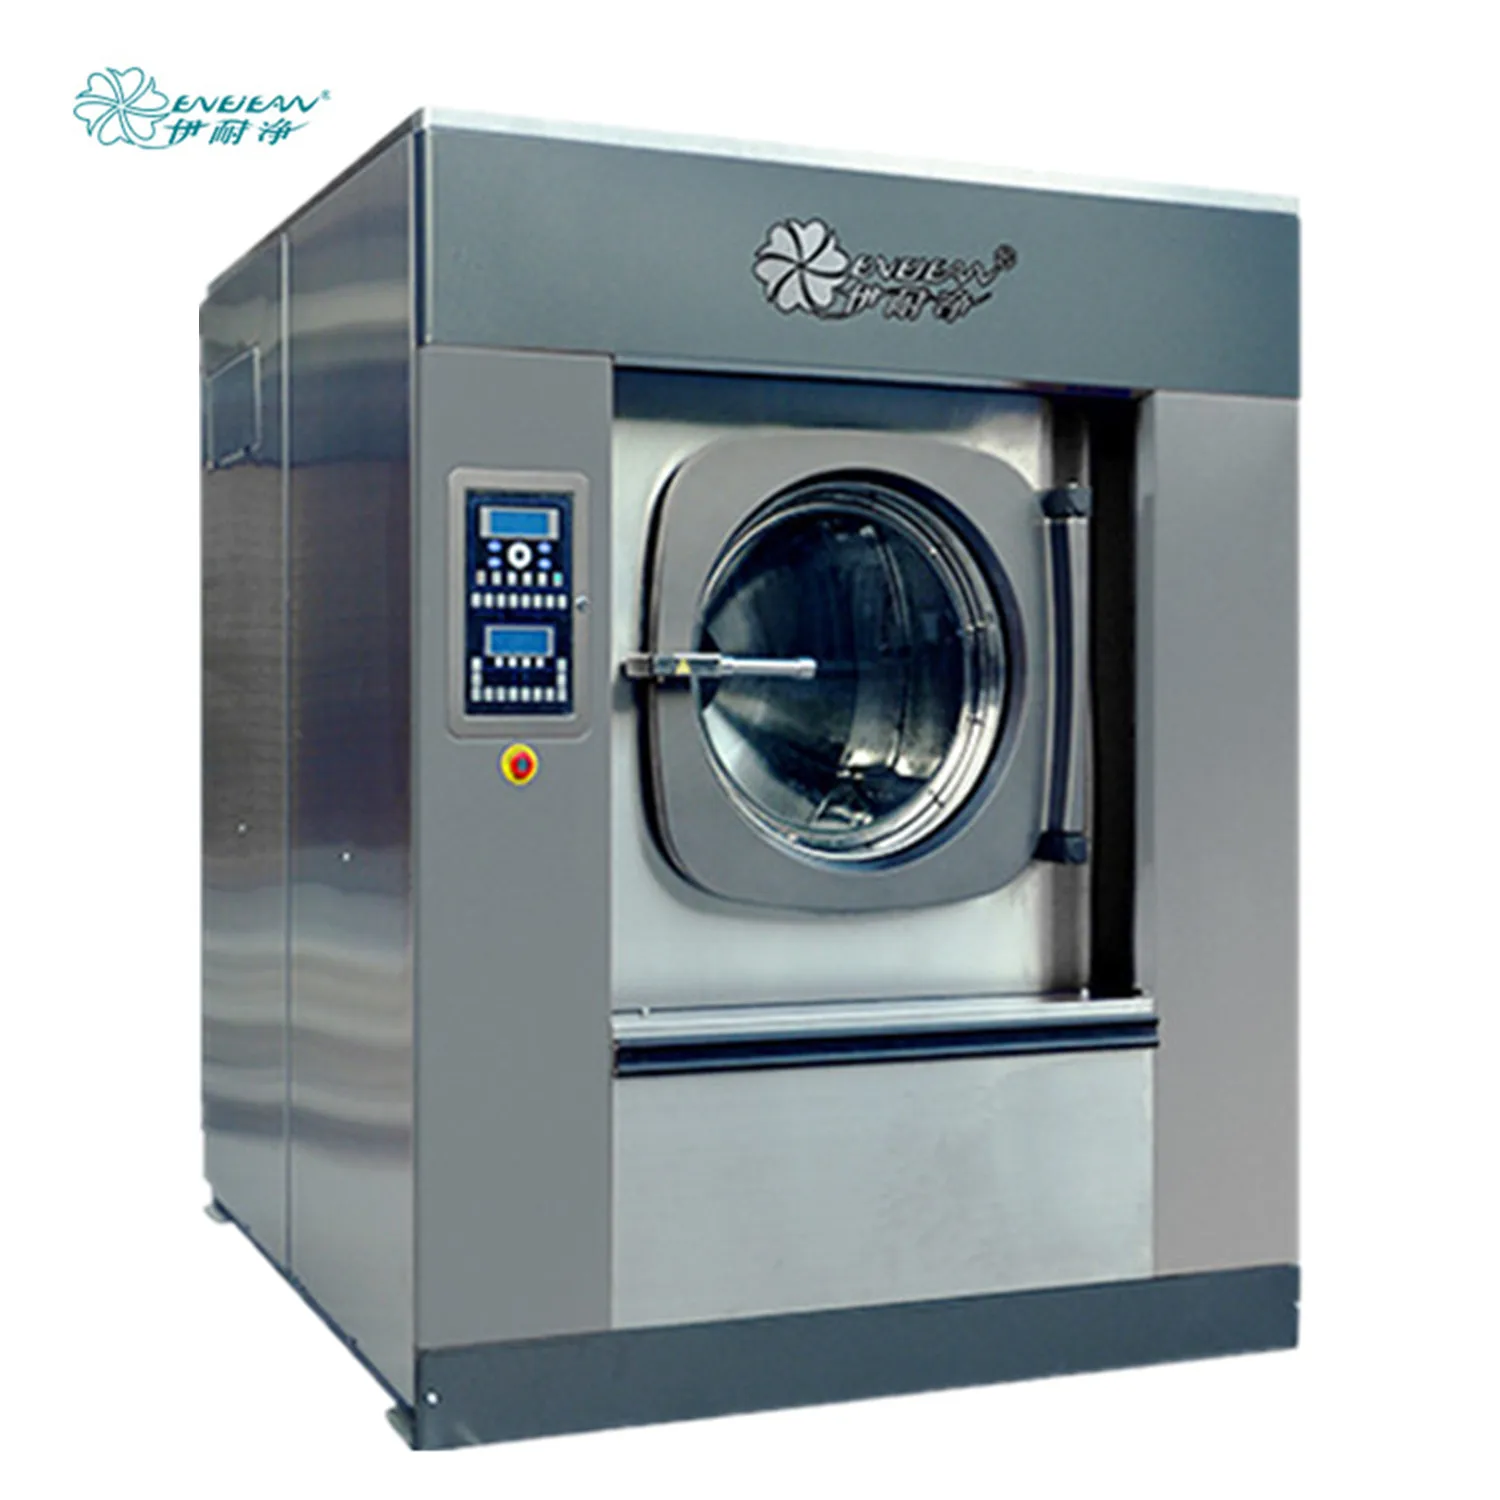 Guangzhou factory price 100 kg laundry industrial washing machine for hotel